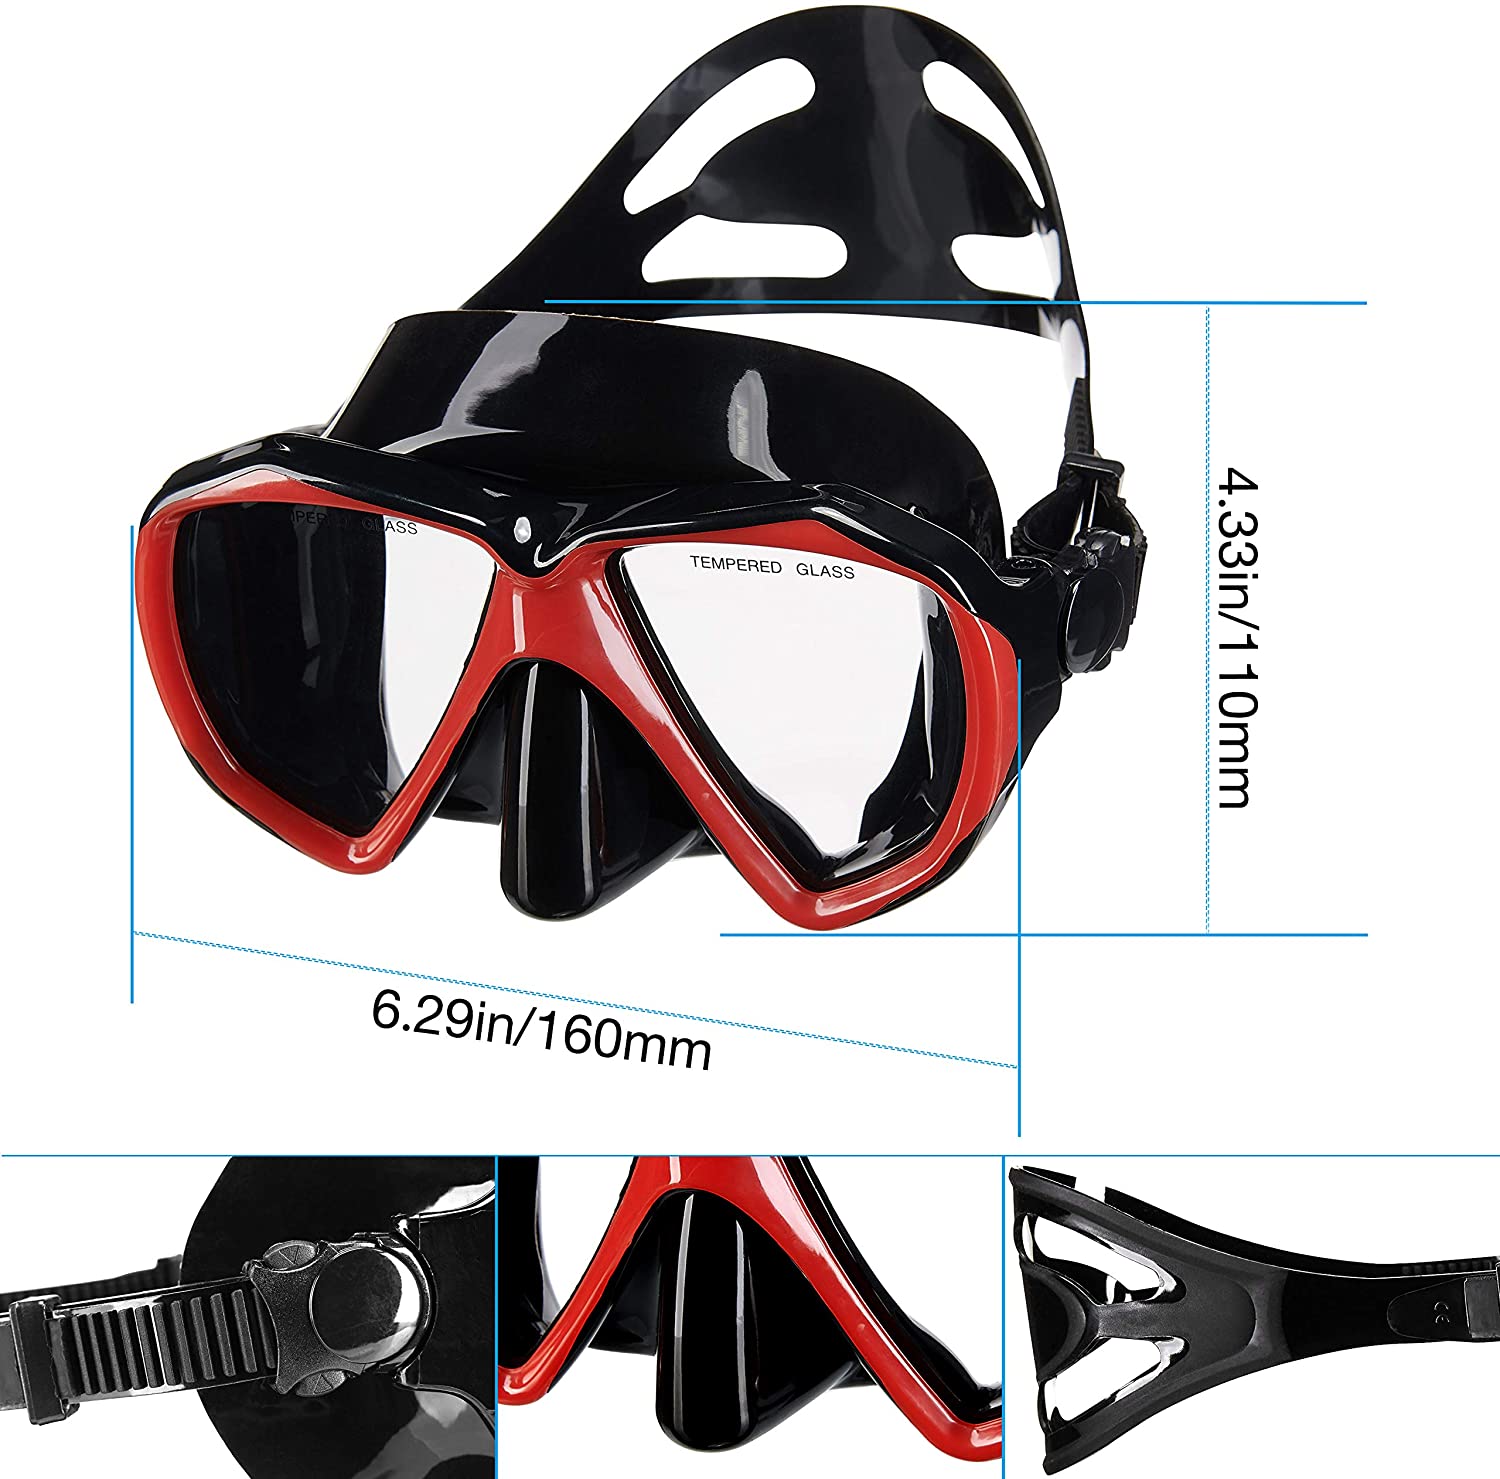 Dorlle Snorkel Set Diving Mask with Anti-Fog Tempered Glass, Anti-Leak Dry  Top Snorkel Mask, Easy Breathing and Adjustable Snorkeling Gear for Adults